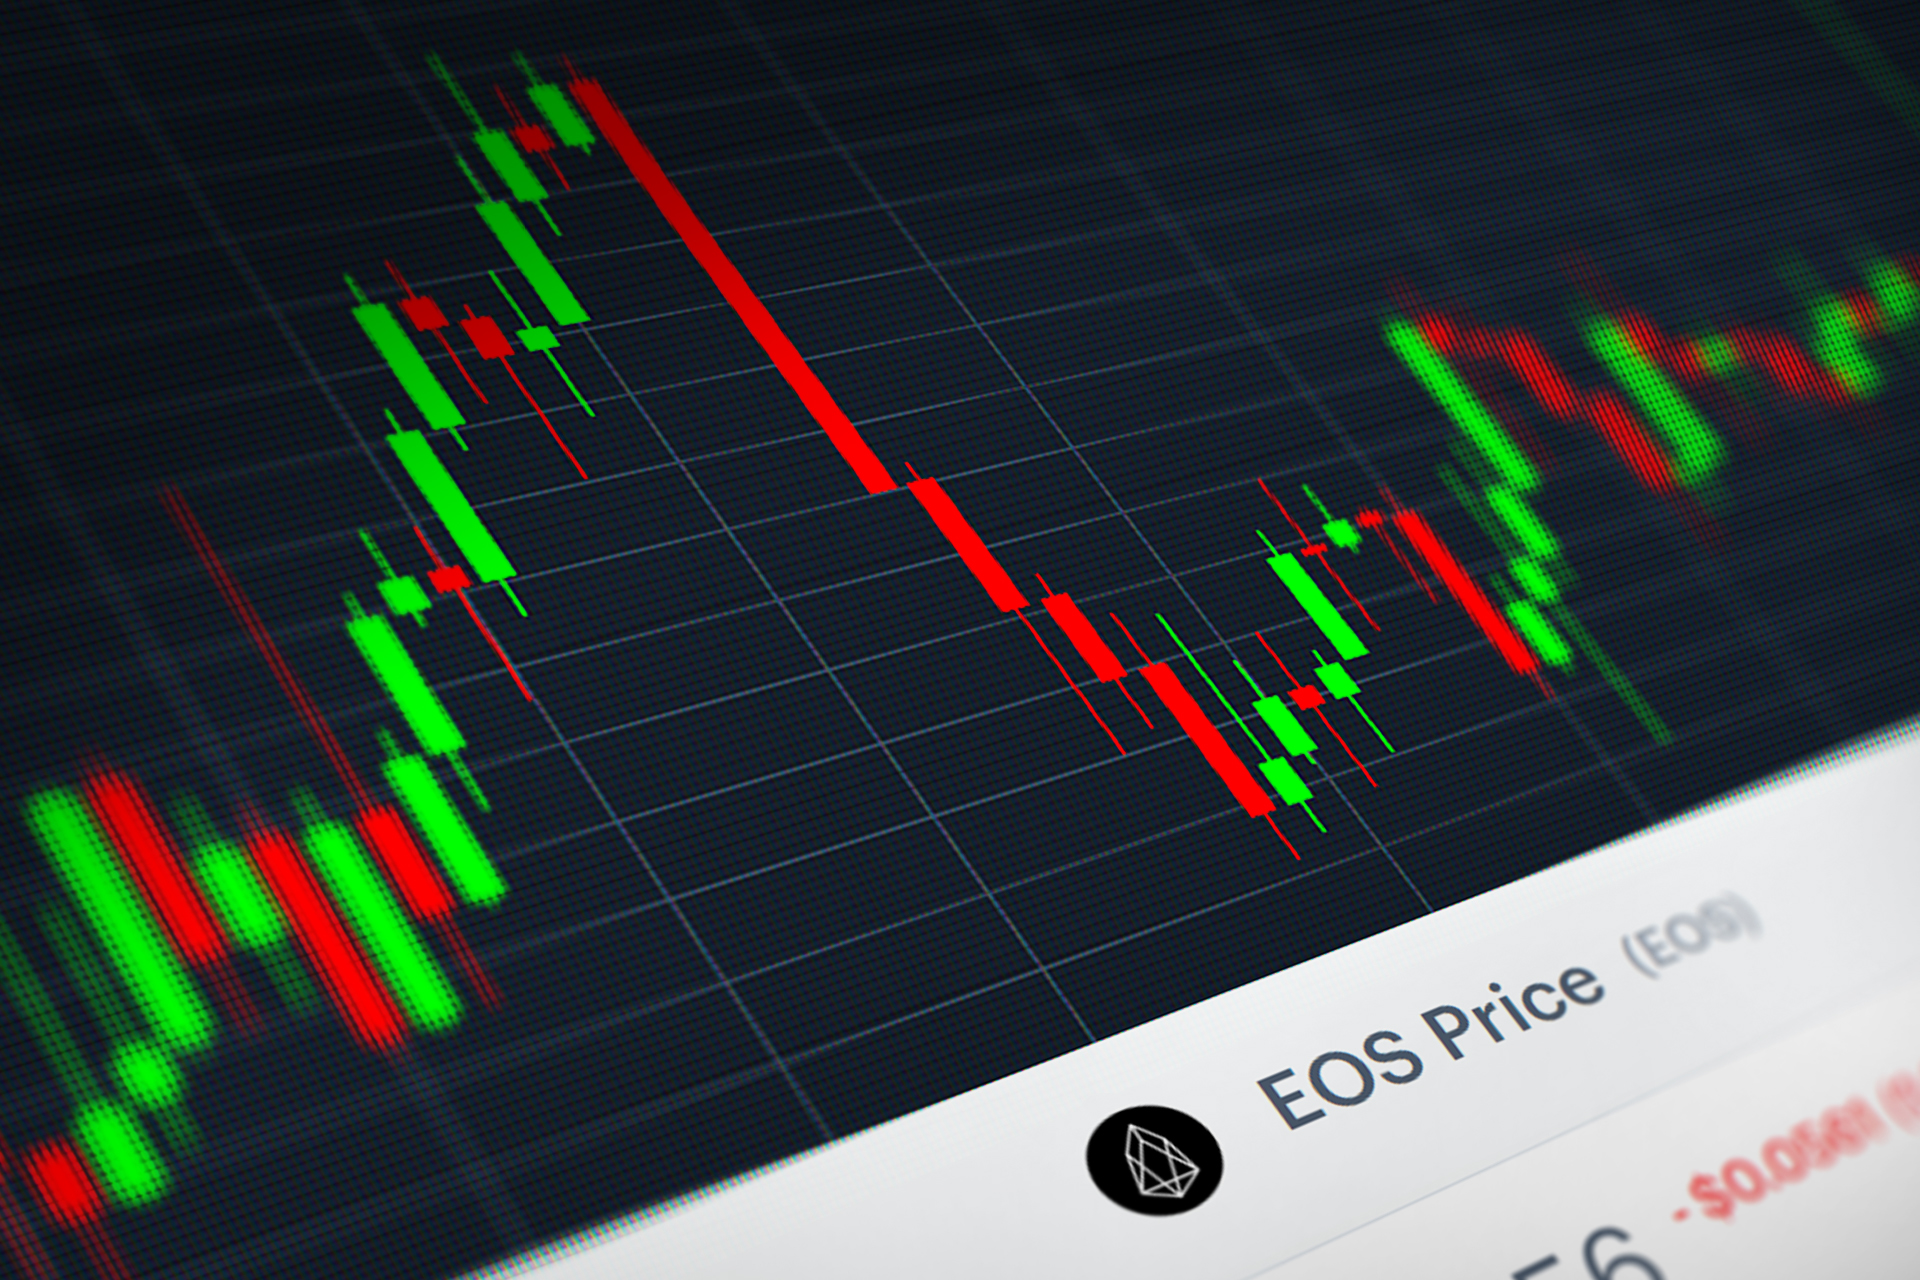 EOS cryptocurrency stock price chart free image download